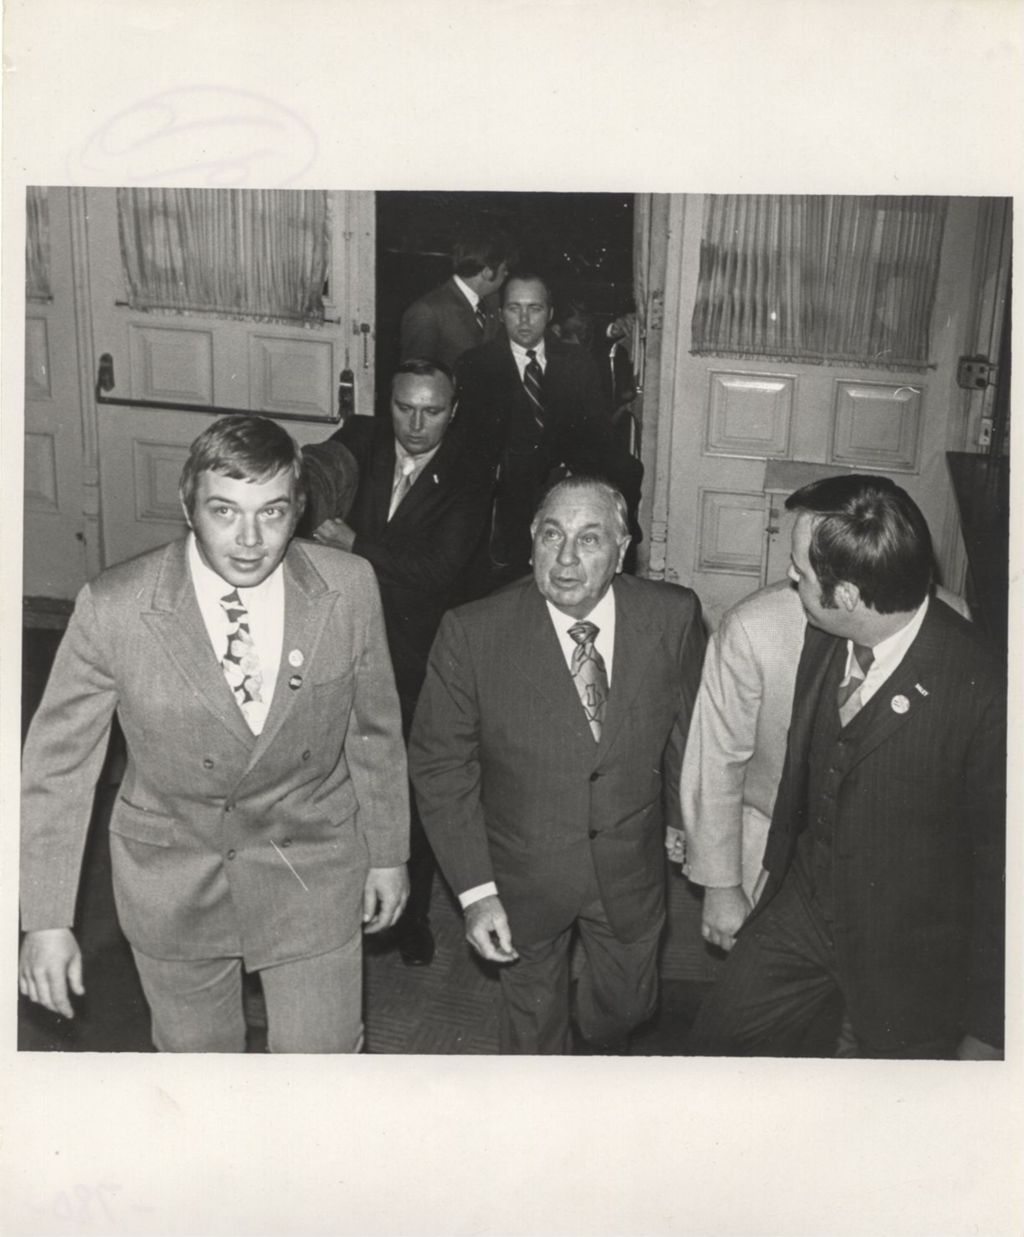 Miniature of Richard J. Daley entering a building from outside